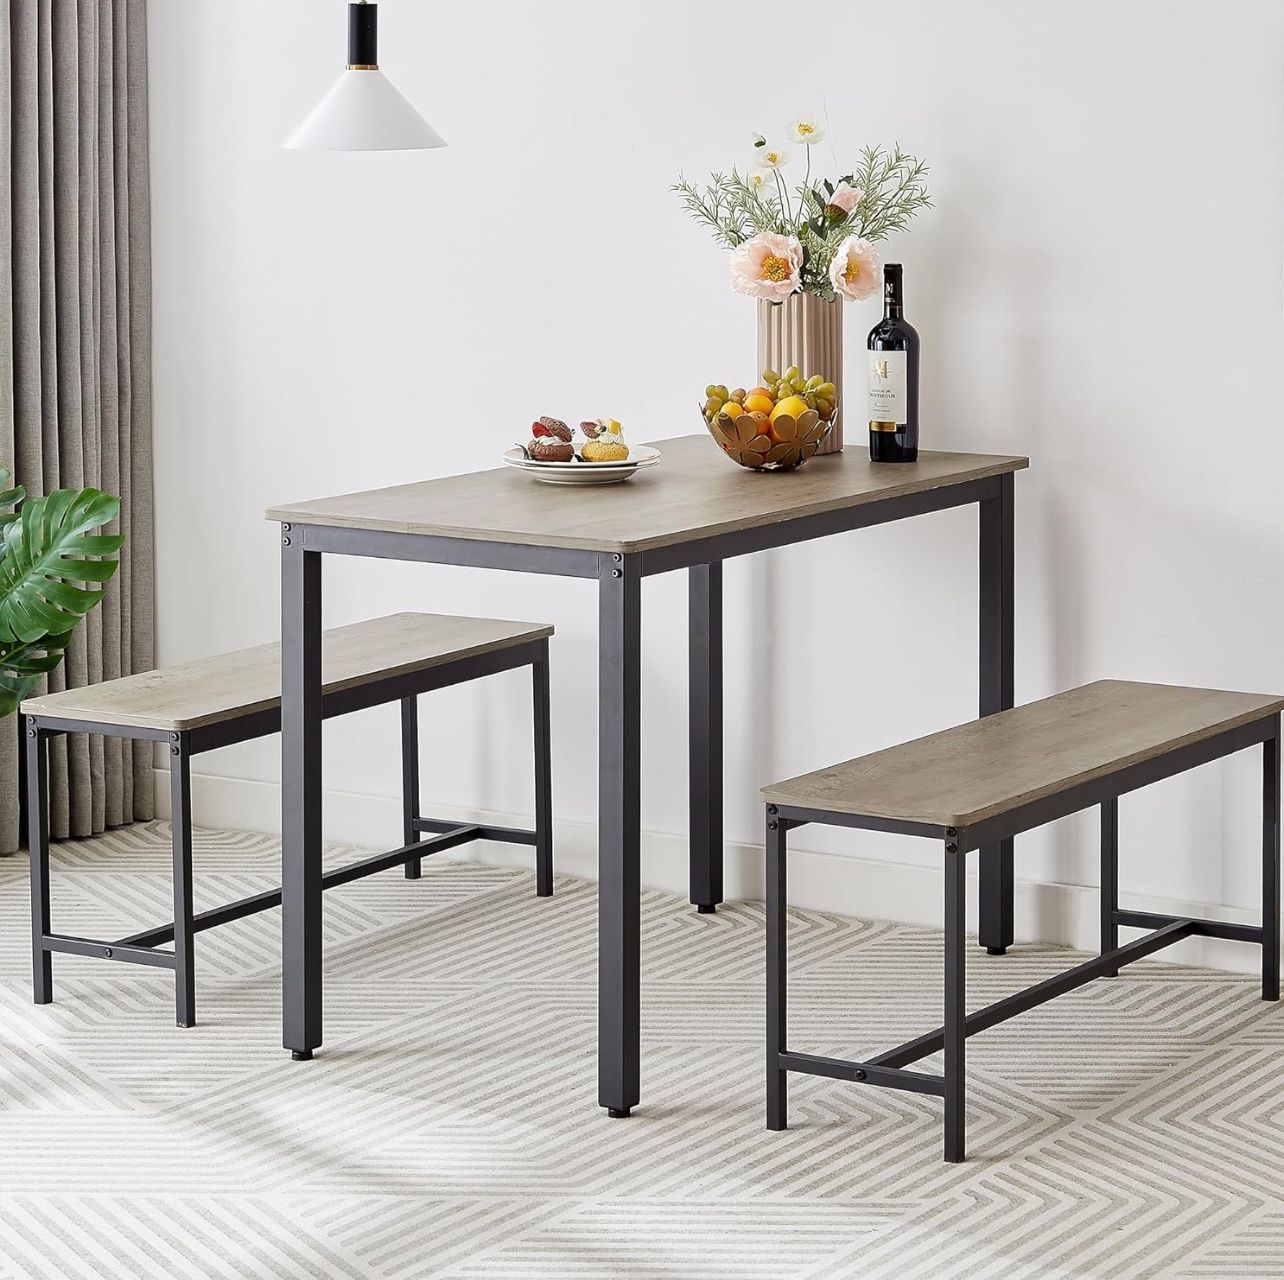 Small Kitchen Table and Chairs for 4, Dining Room Table and 2 Chair 1 Bench, Table and Chairs Set of 4 for Small Space, Apartment- Durability- Easy to